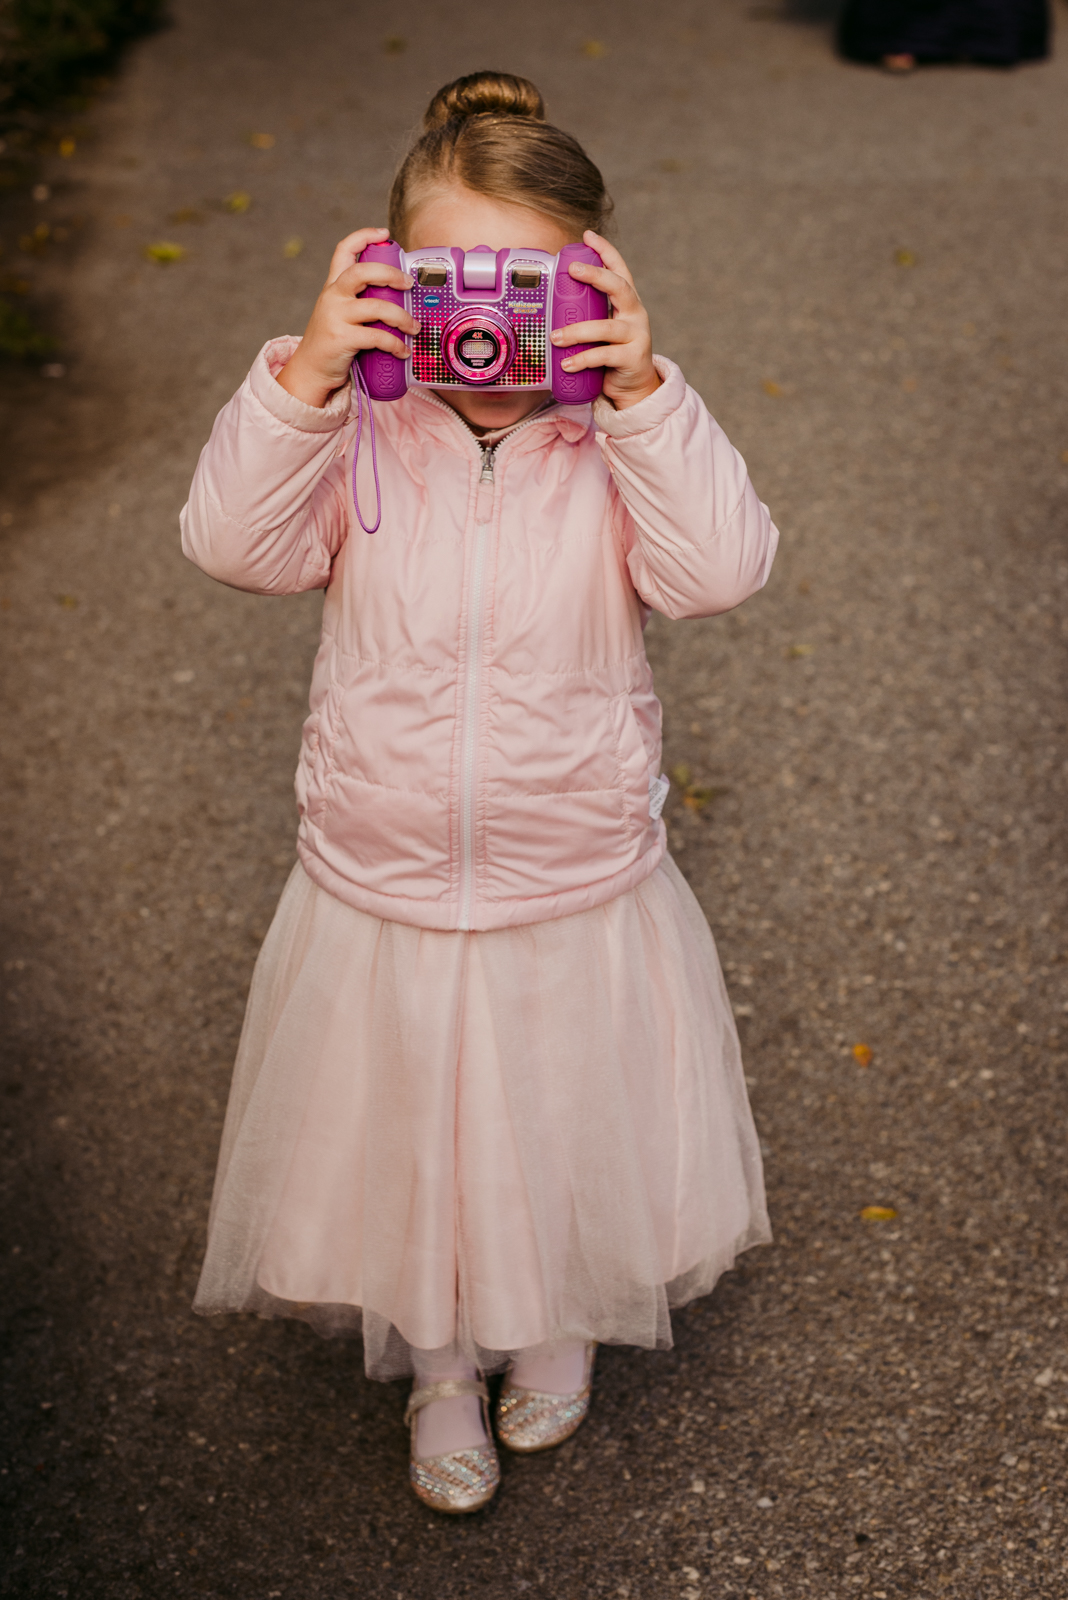 flower girl holding pink camera up to her eye